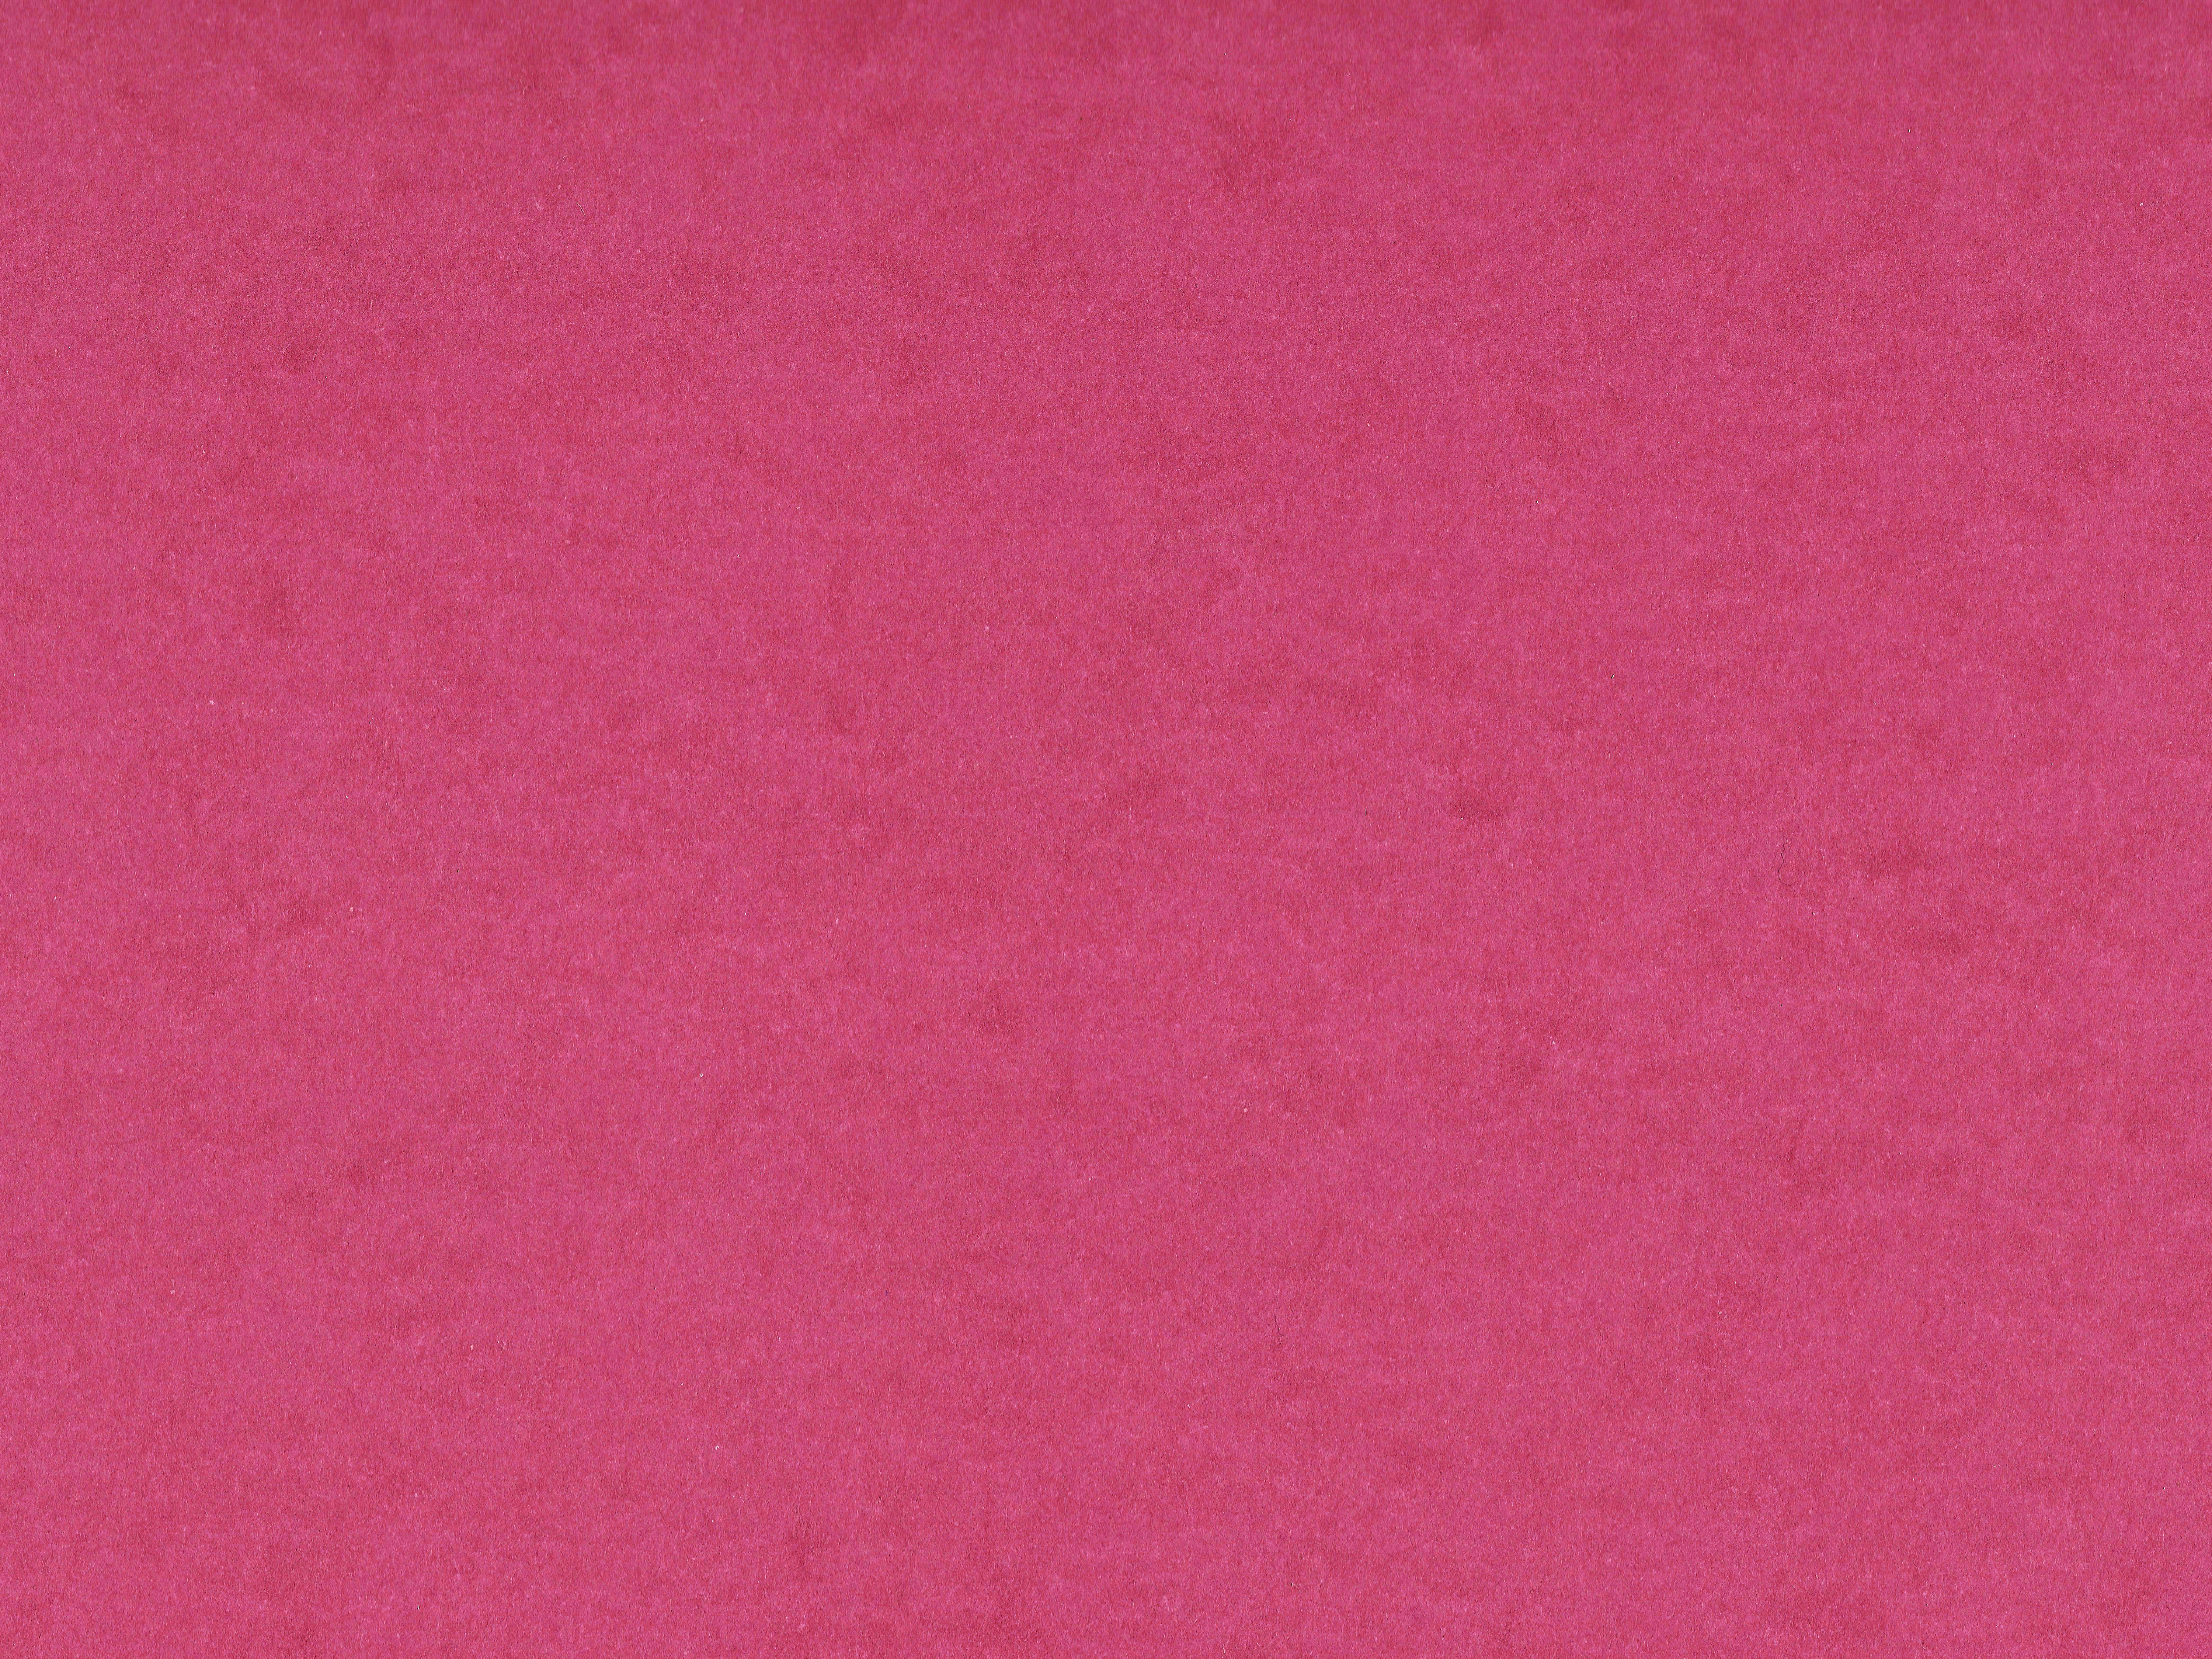 Magenta Hot Pink Card Stock Paper Texture Picture, Free Photograph